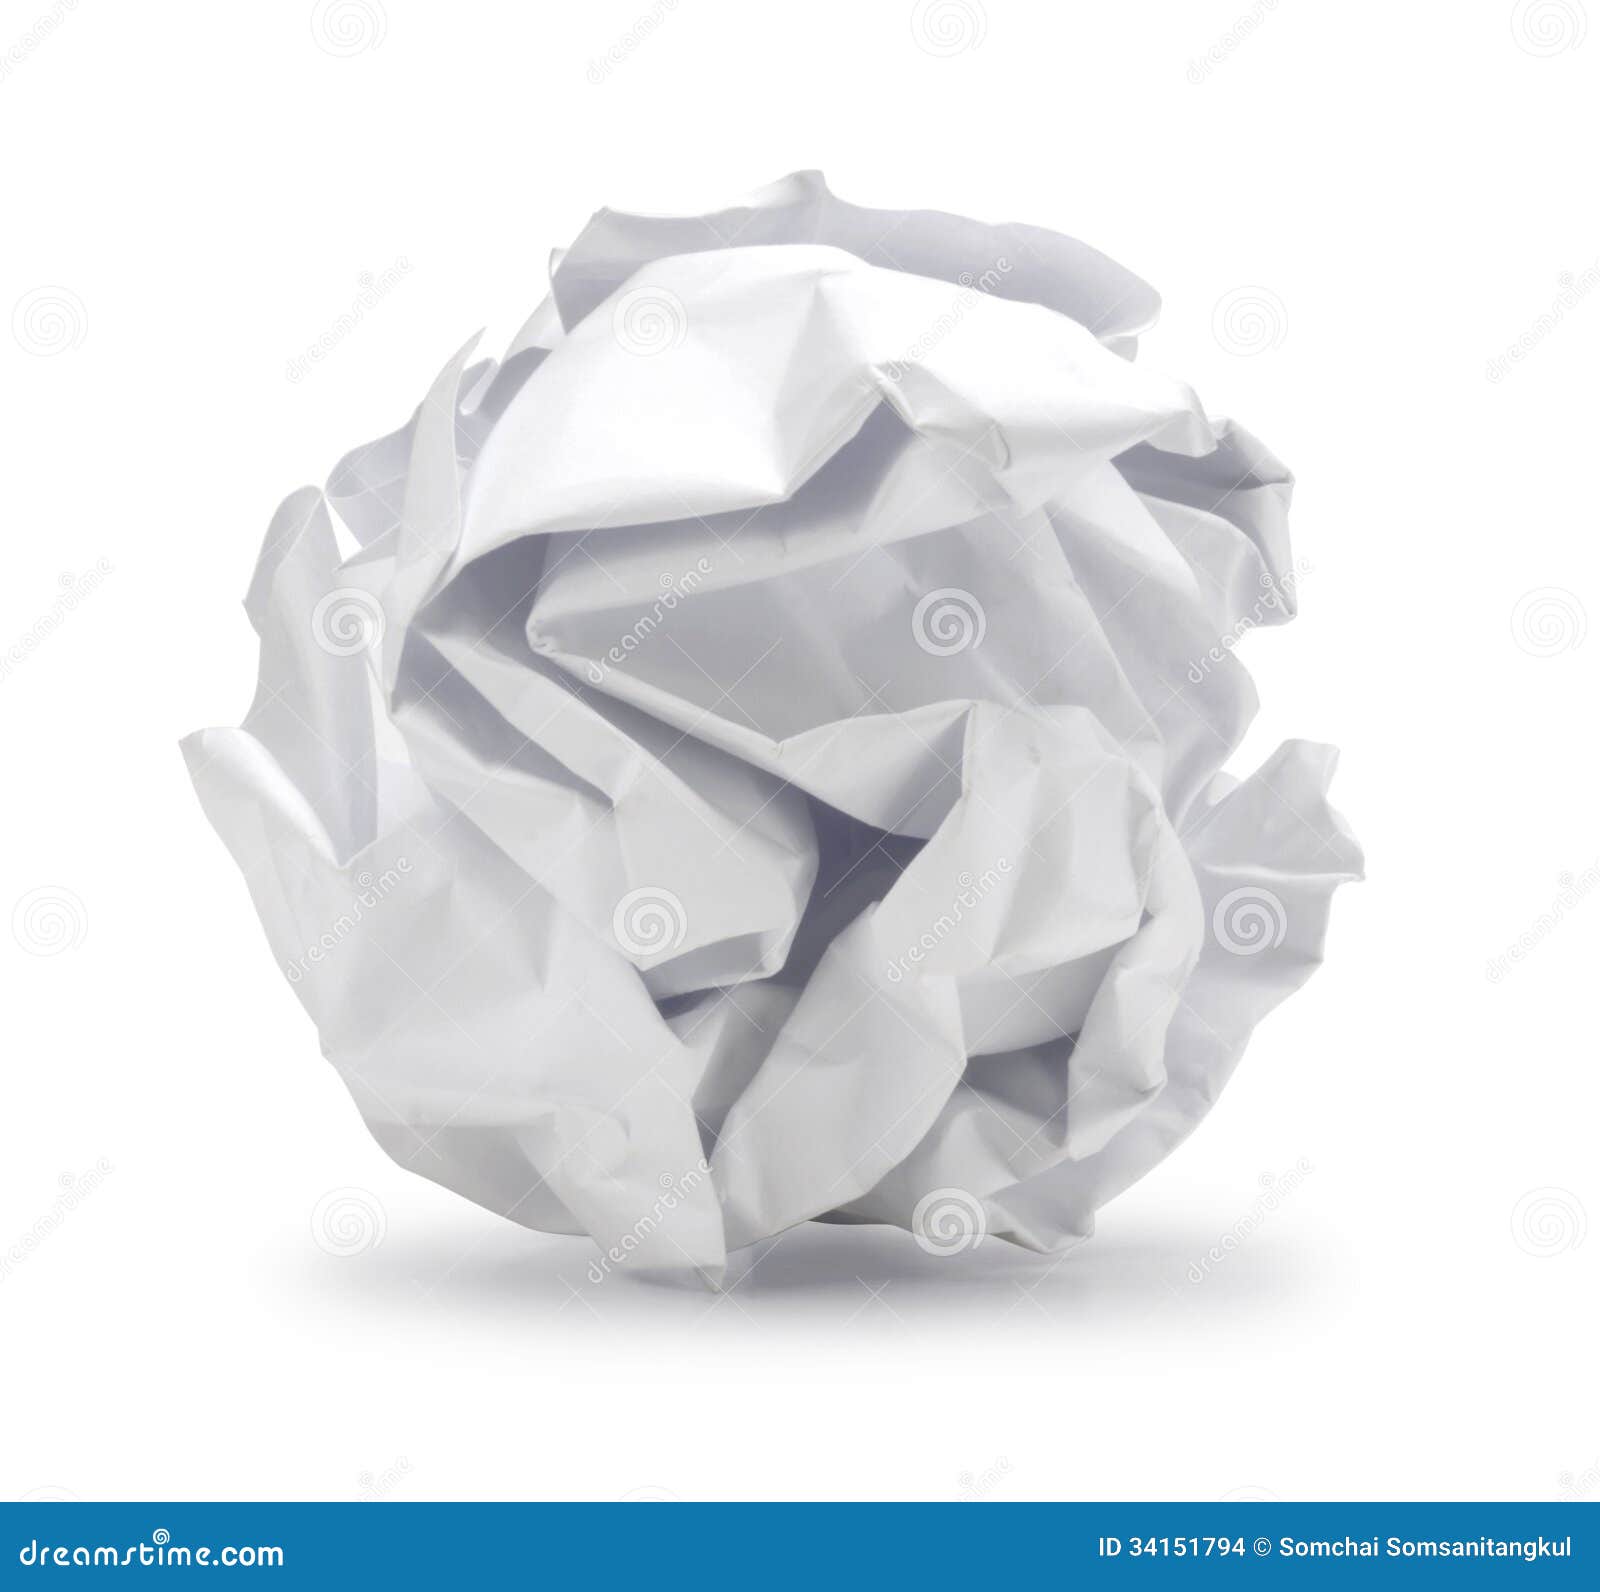 clipart crumpled paper - photo #6